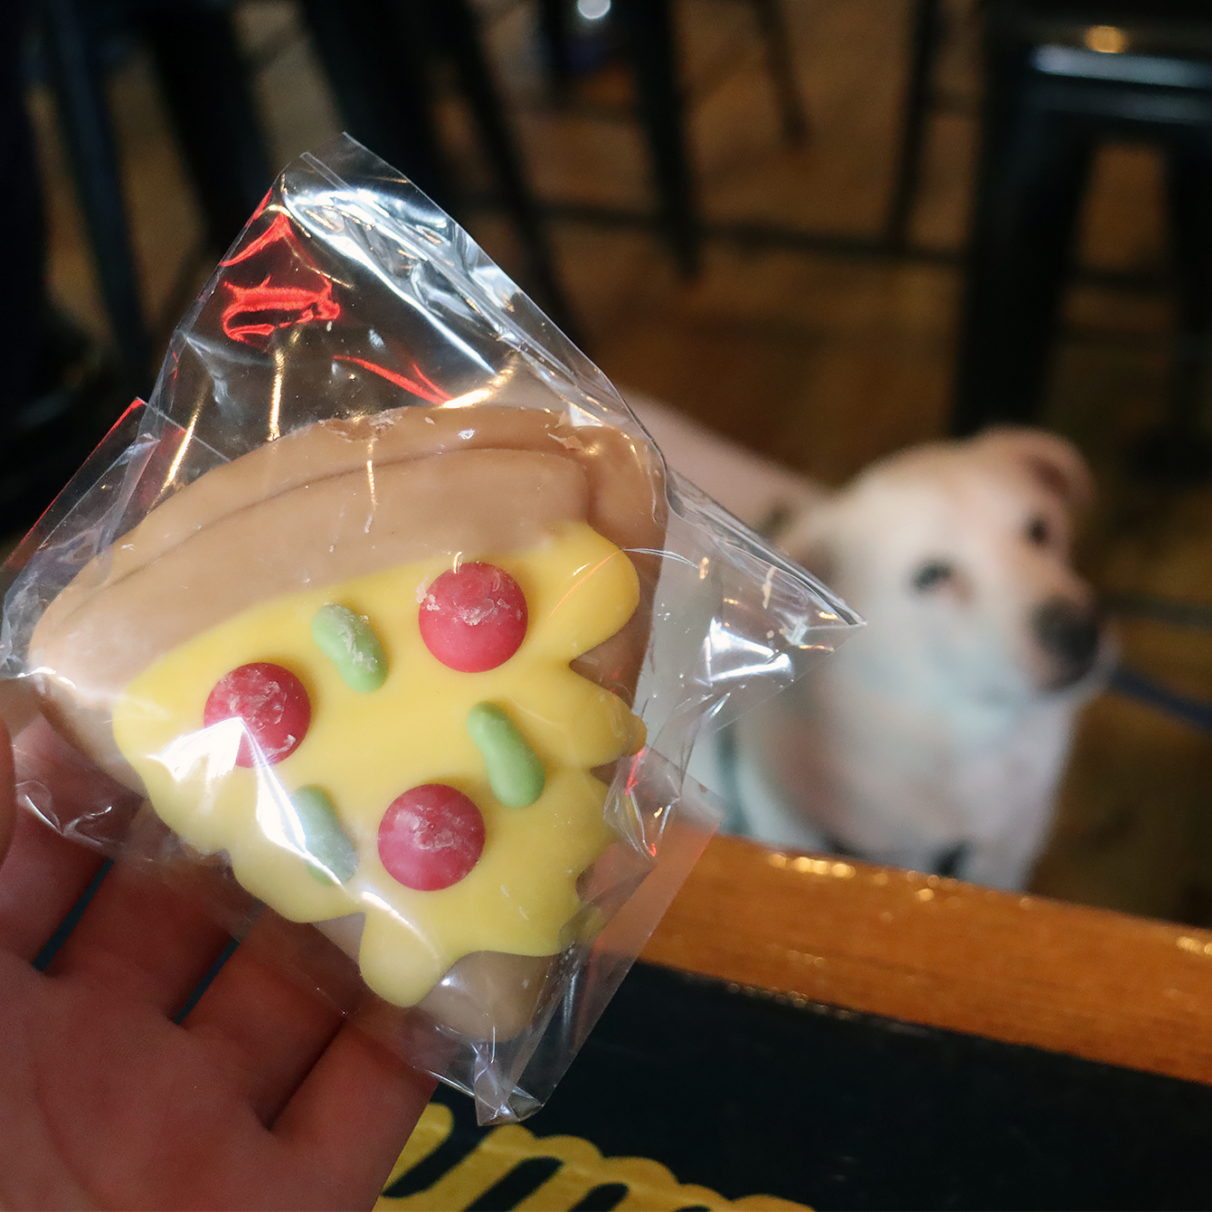 A white dog side eyes a dog treat decorated as a slice of pizza.